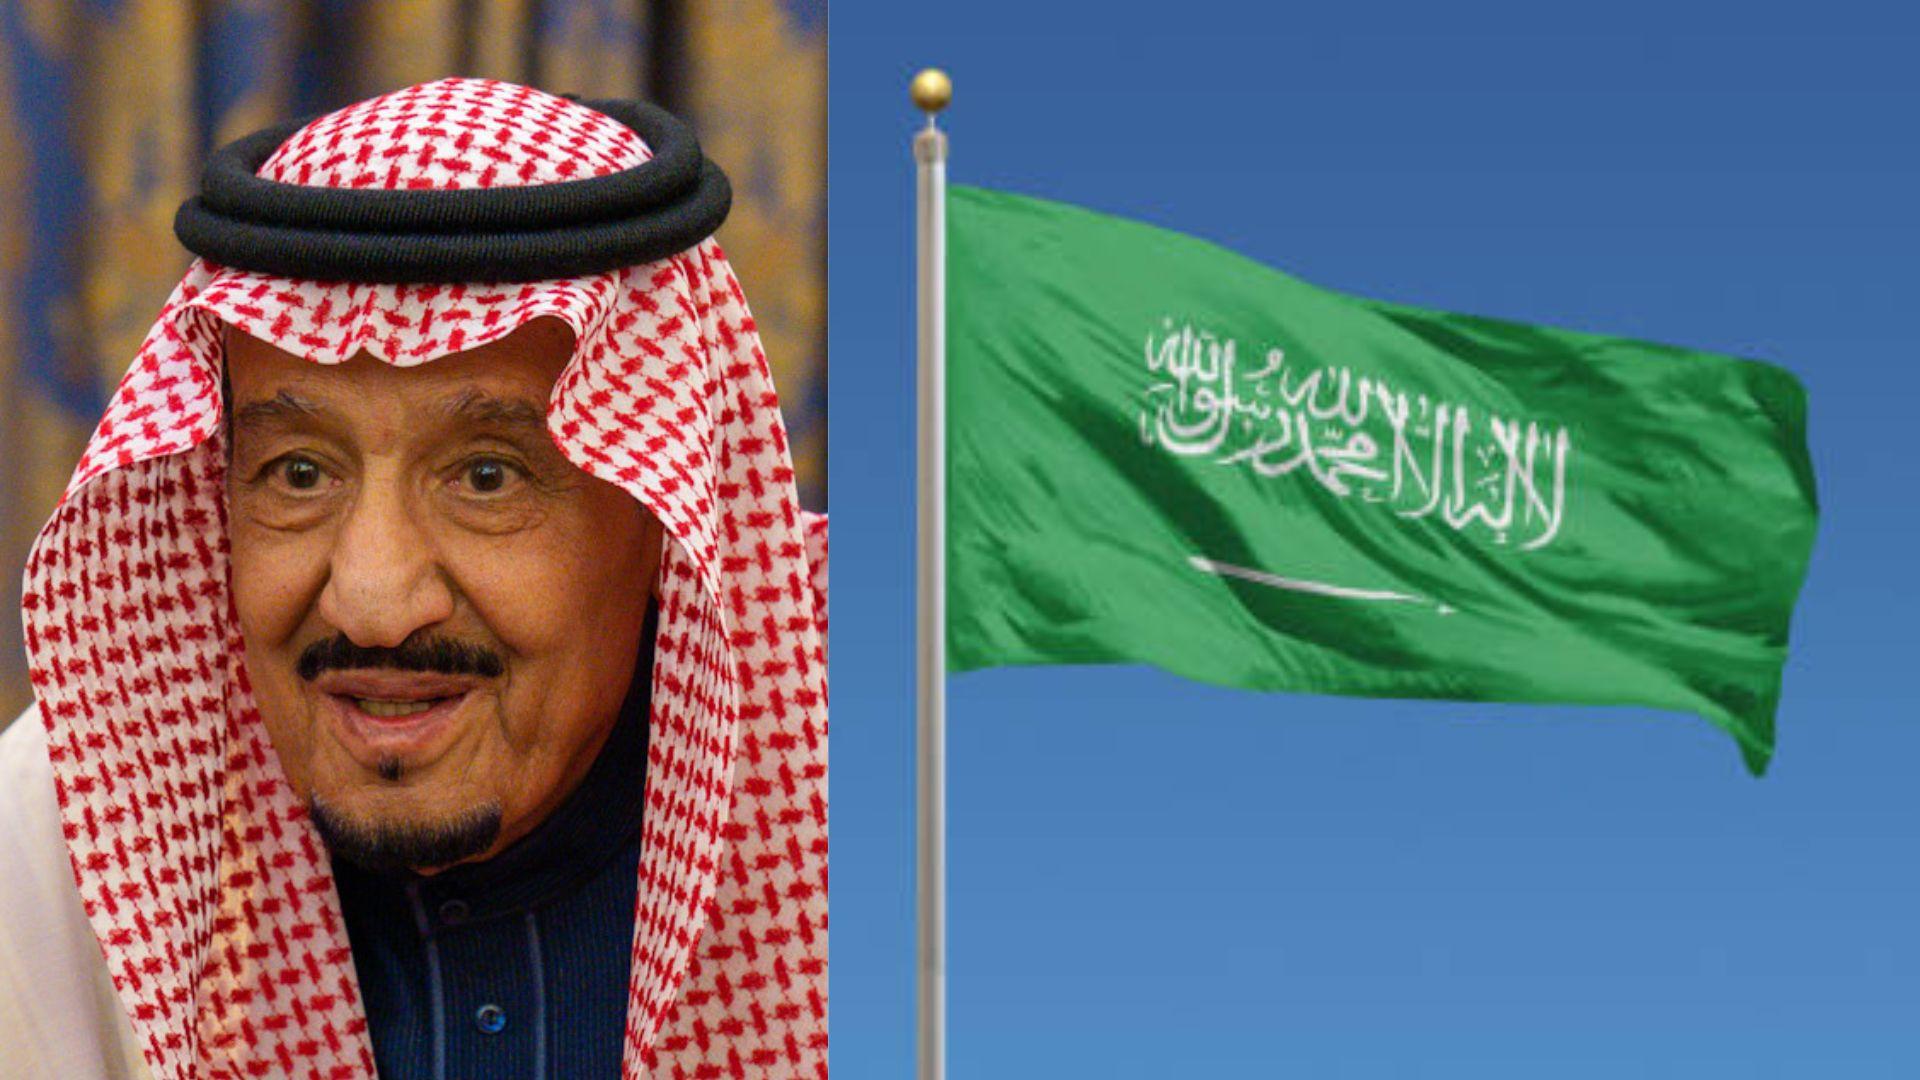 <p>Prince Mohammed, the son of the King of Saudi Arabia, Salman, is the face of Neom and the wider Vision 2030 project, which aims to restructure the country to ensure everyone has the opportunity to succeed.  </p> <p>The prince has claimed he wants to revolutionize the Saudi nation and reduce its dependency on oil. </p>